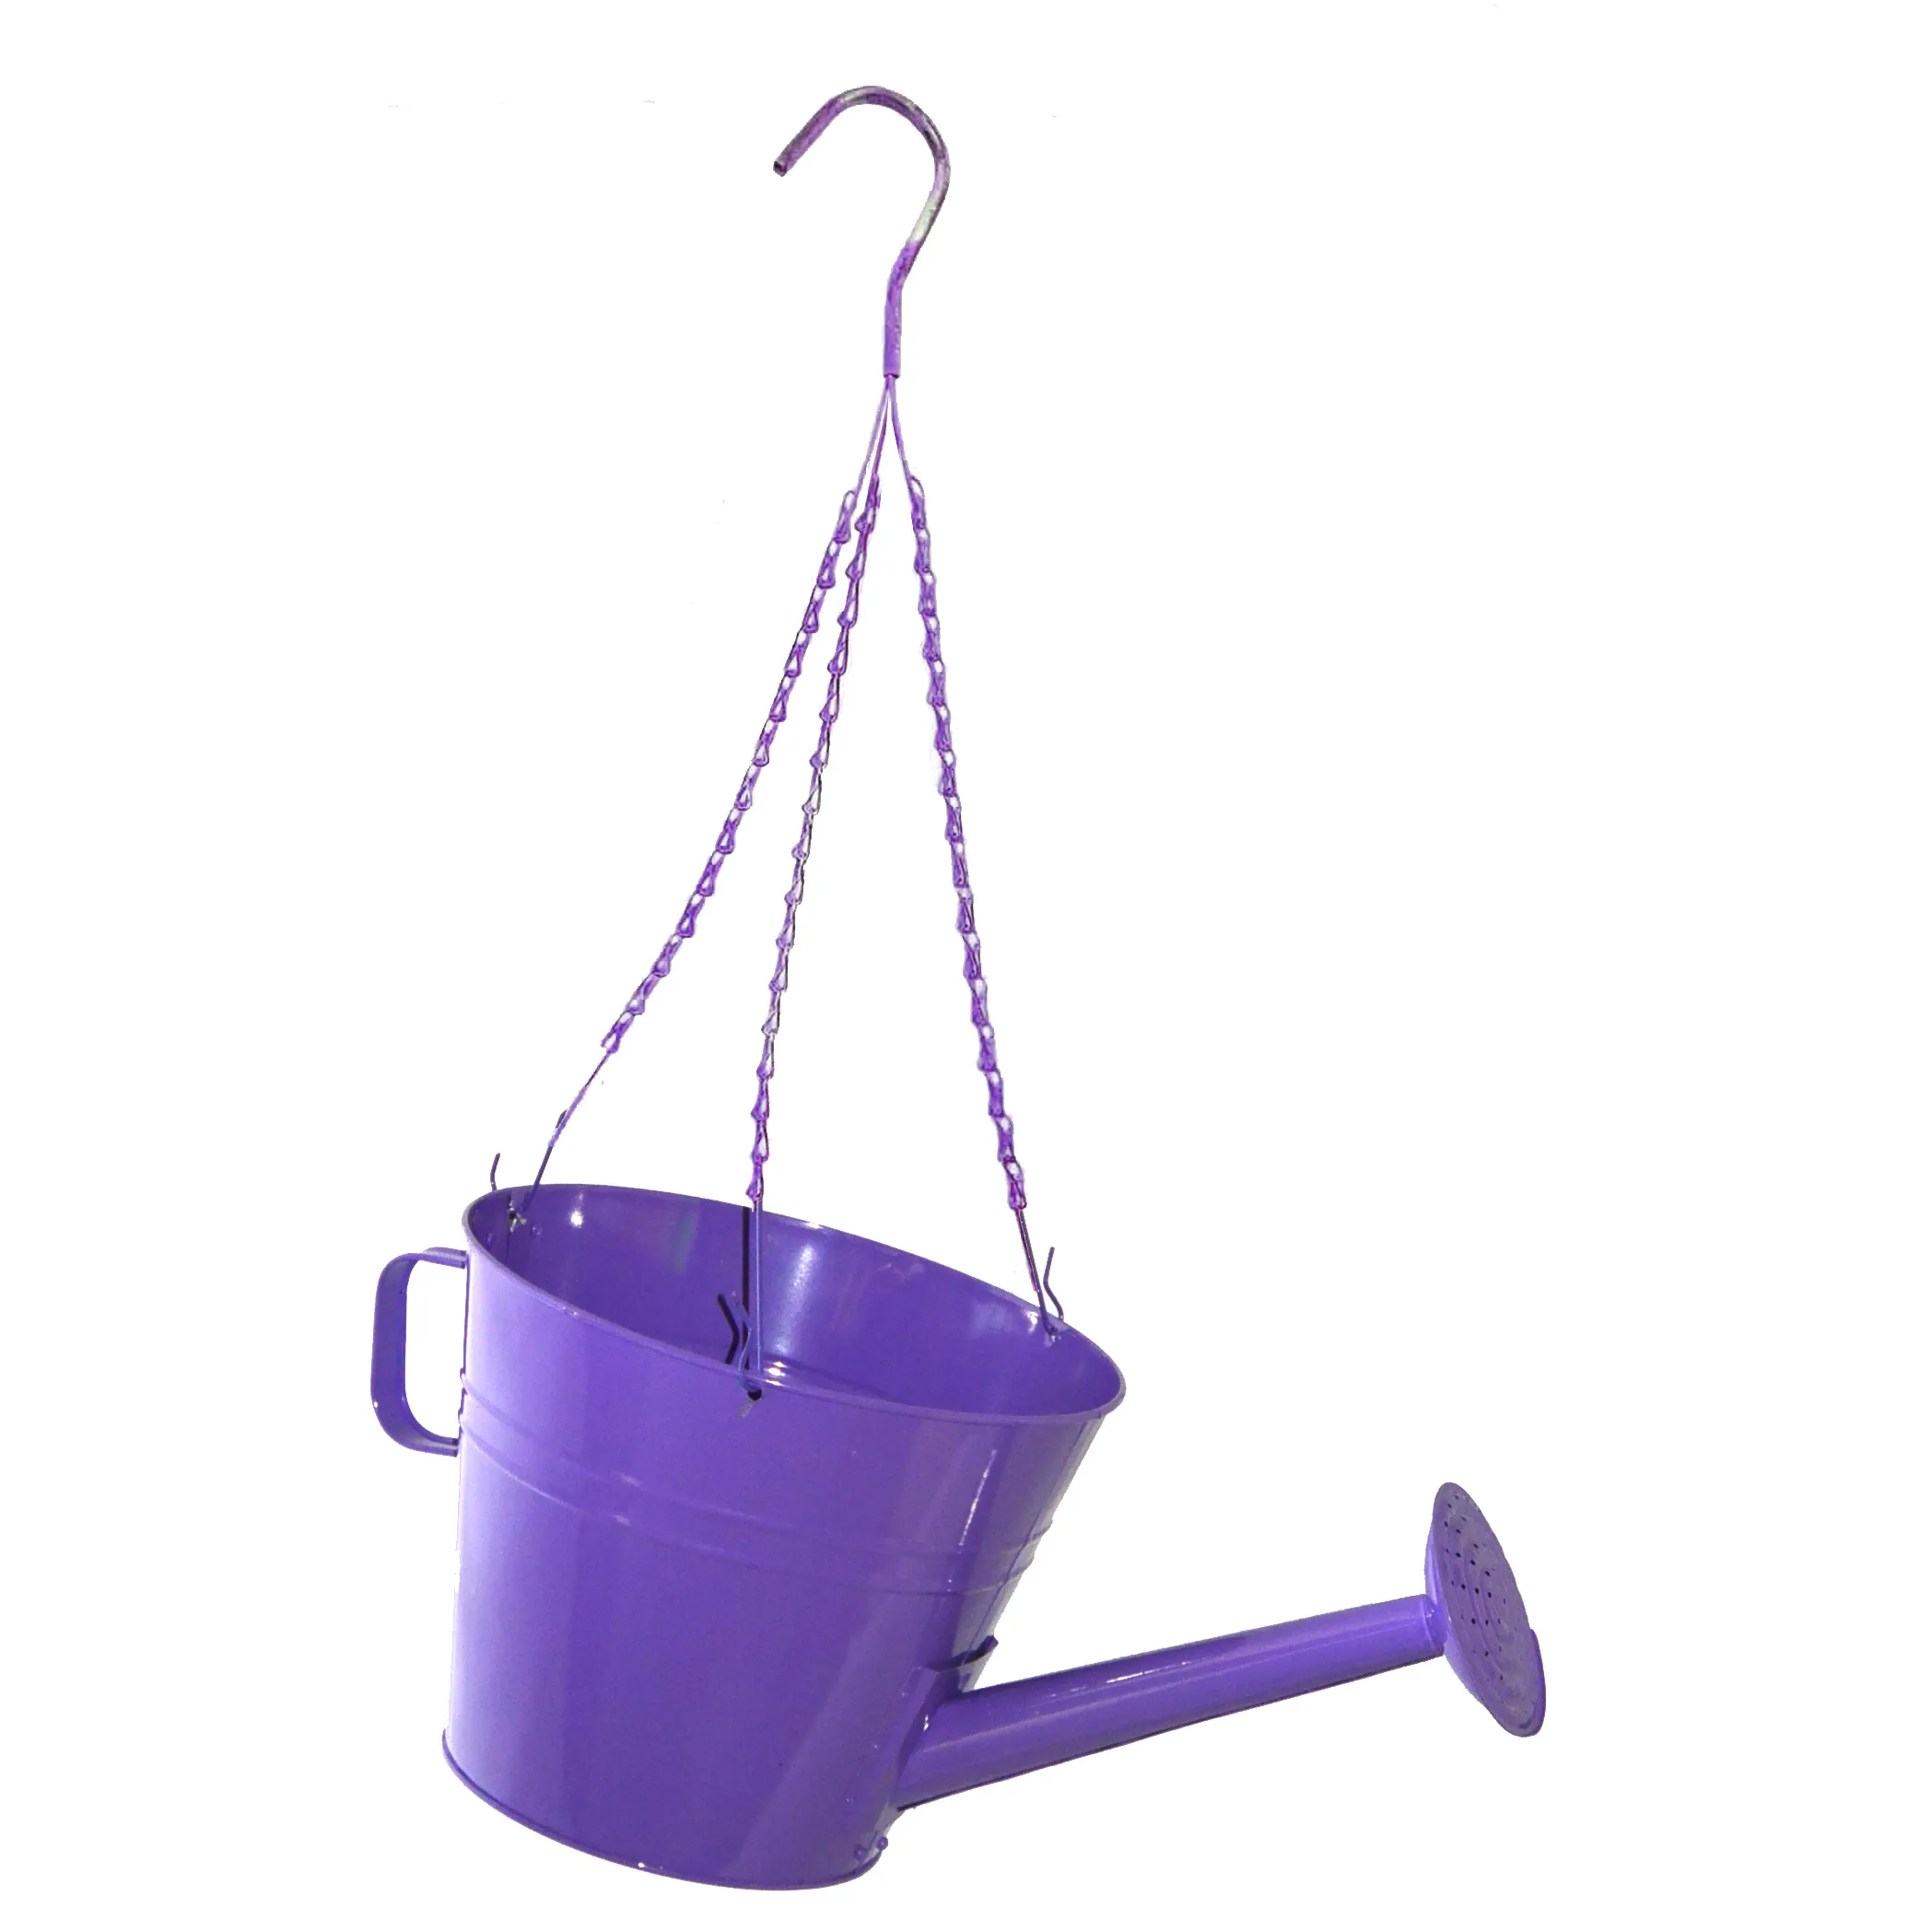 Hanging Water Can Planter 10 Inch Key West - 12 per case - Decorative Planters